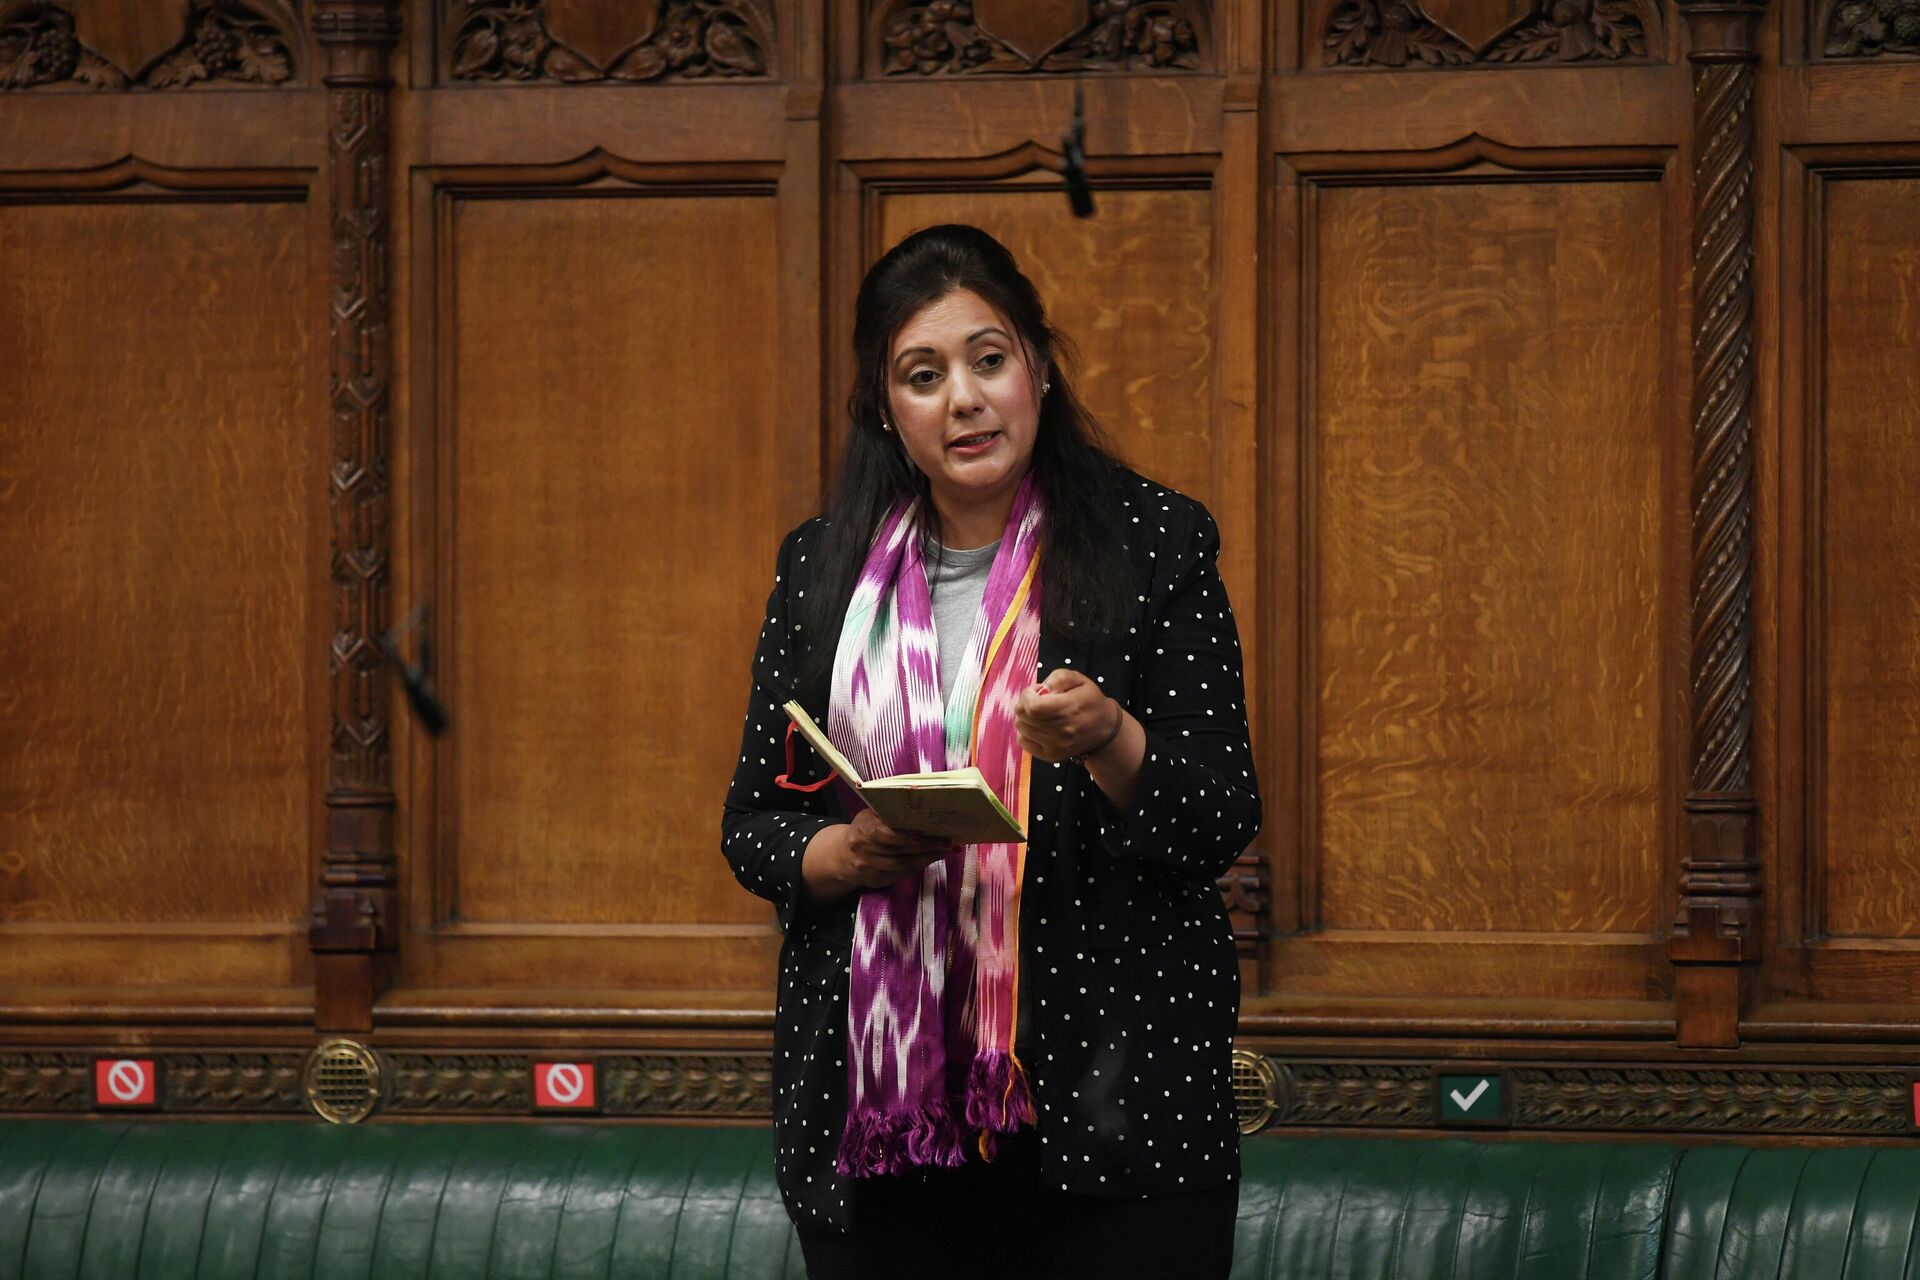 FILE PHOTO: MP Nusrat Ghani speaks during a session in Parliament in London, Britain May 12, 2021 - Sputnik International, 1920, 24.01.2022